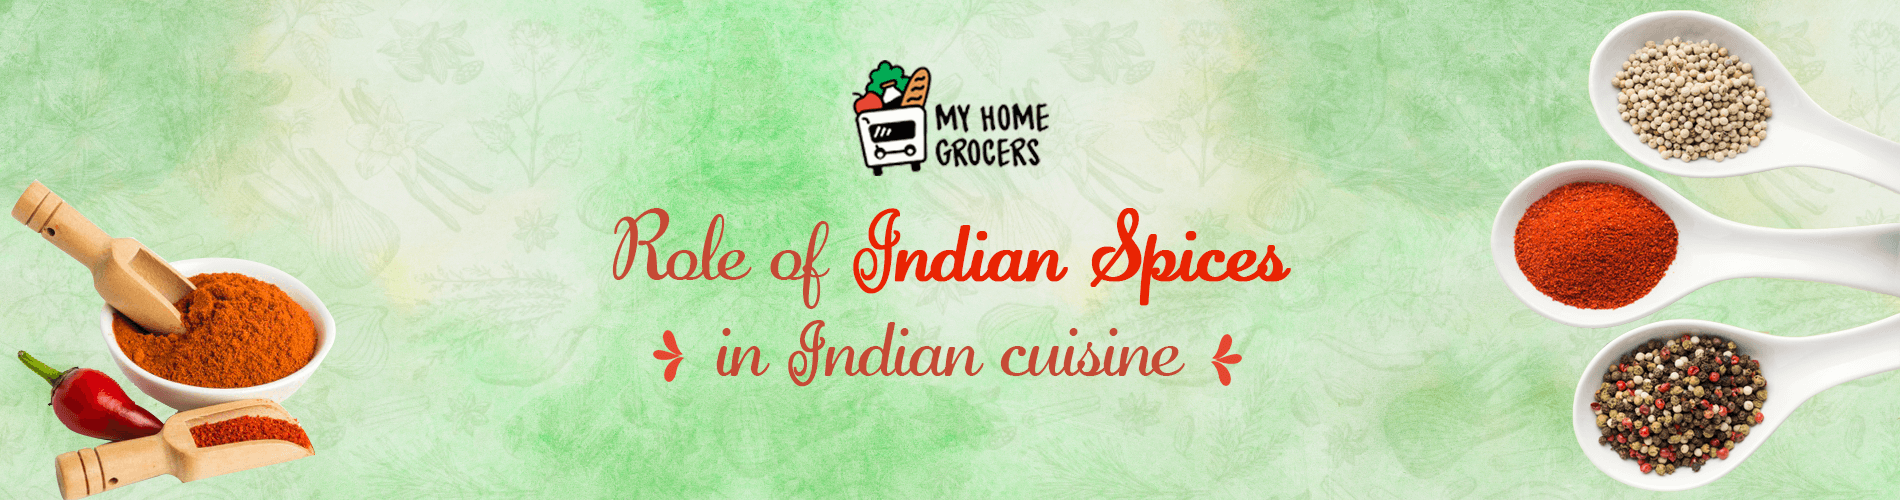 Role of Indian spices in Indian cuisine